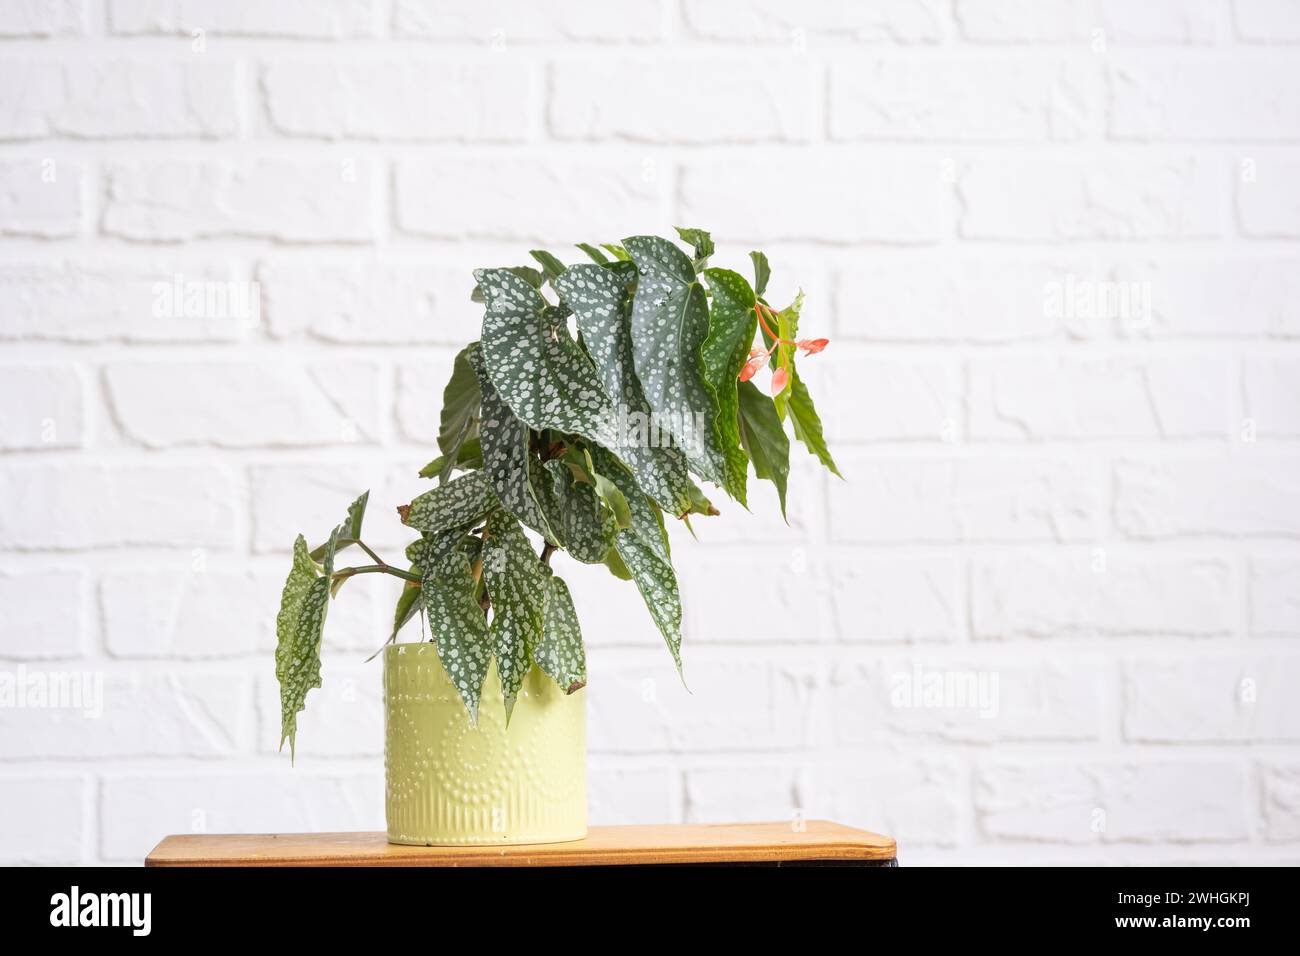 Home potted plant begonia angel wings snowstorm polka dot leaves decorative deciduous in interior on table of house. Hobbies in Stock Photo